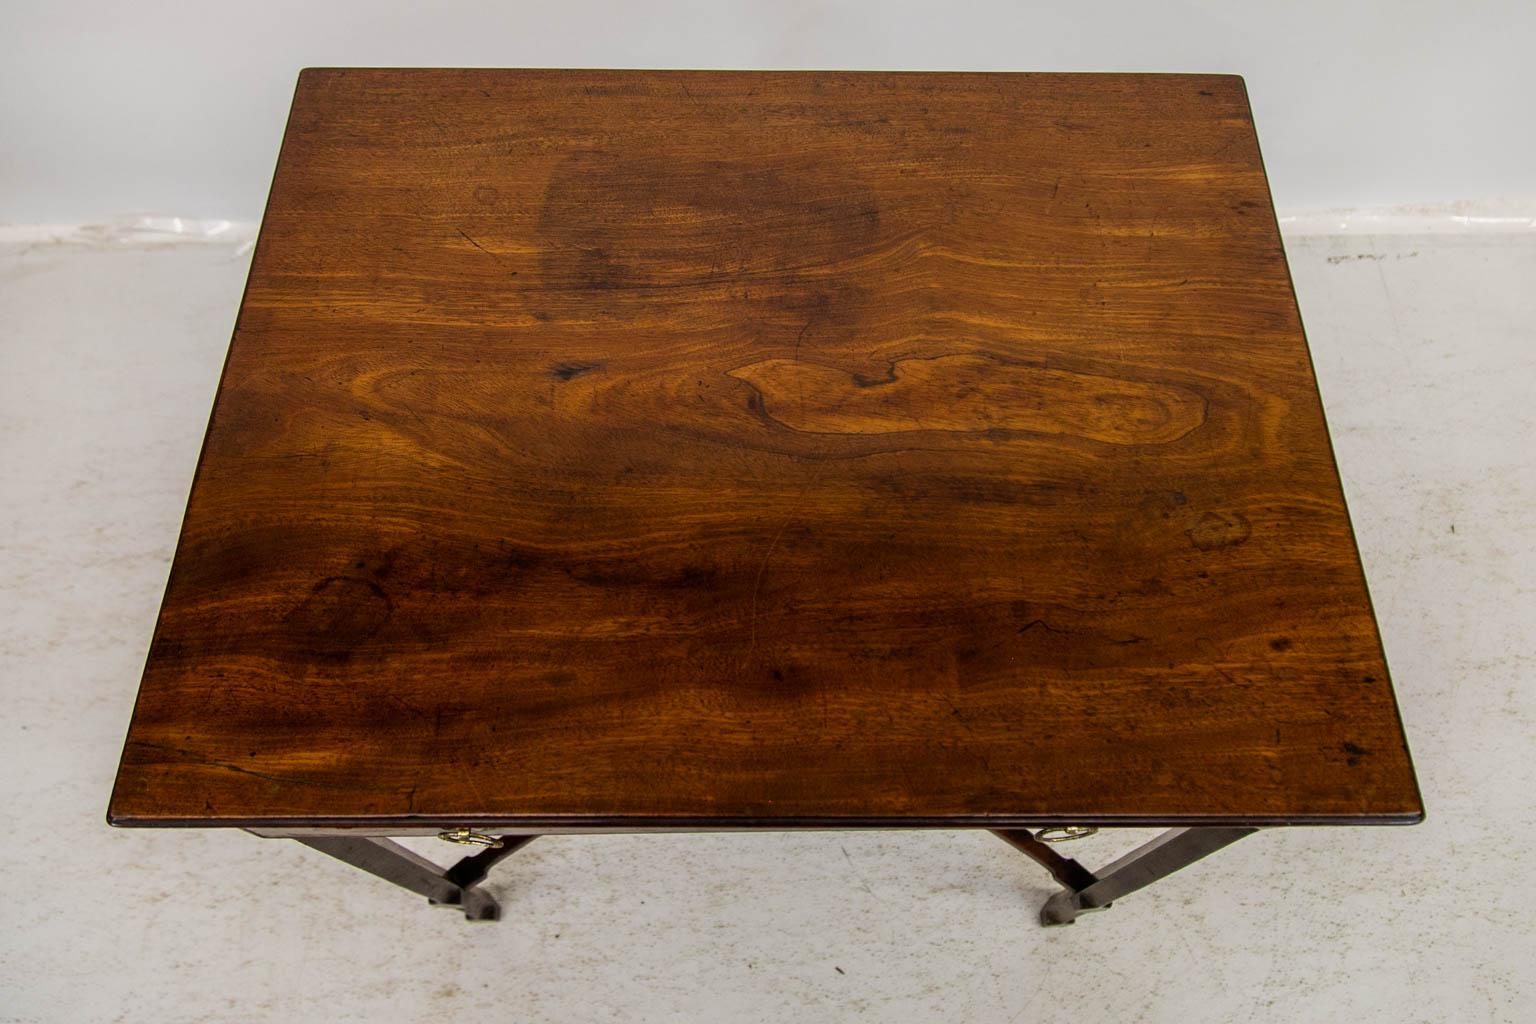 This tea table has one working deep drawer with incised cockbeaded edges. It is finished on all four sides. The legs are chamfered on all four sides and have shaped lamb's tongues at the top and bottom of the chamfers. The legs are connected by a